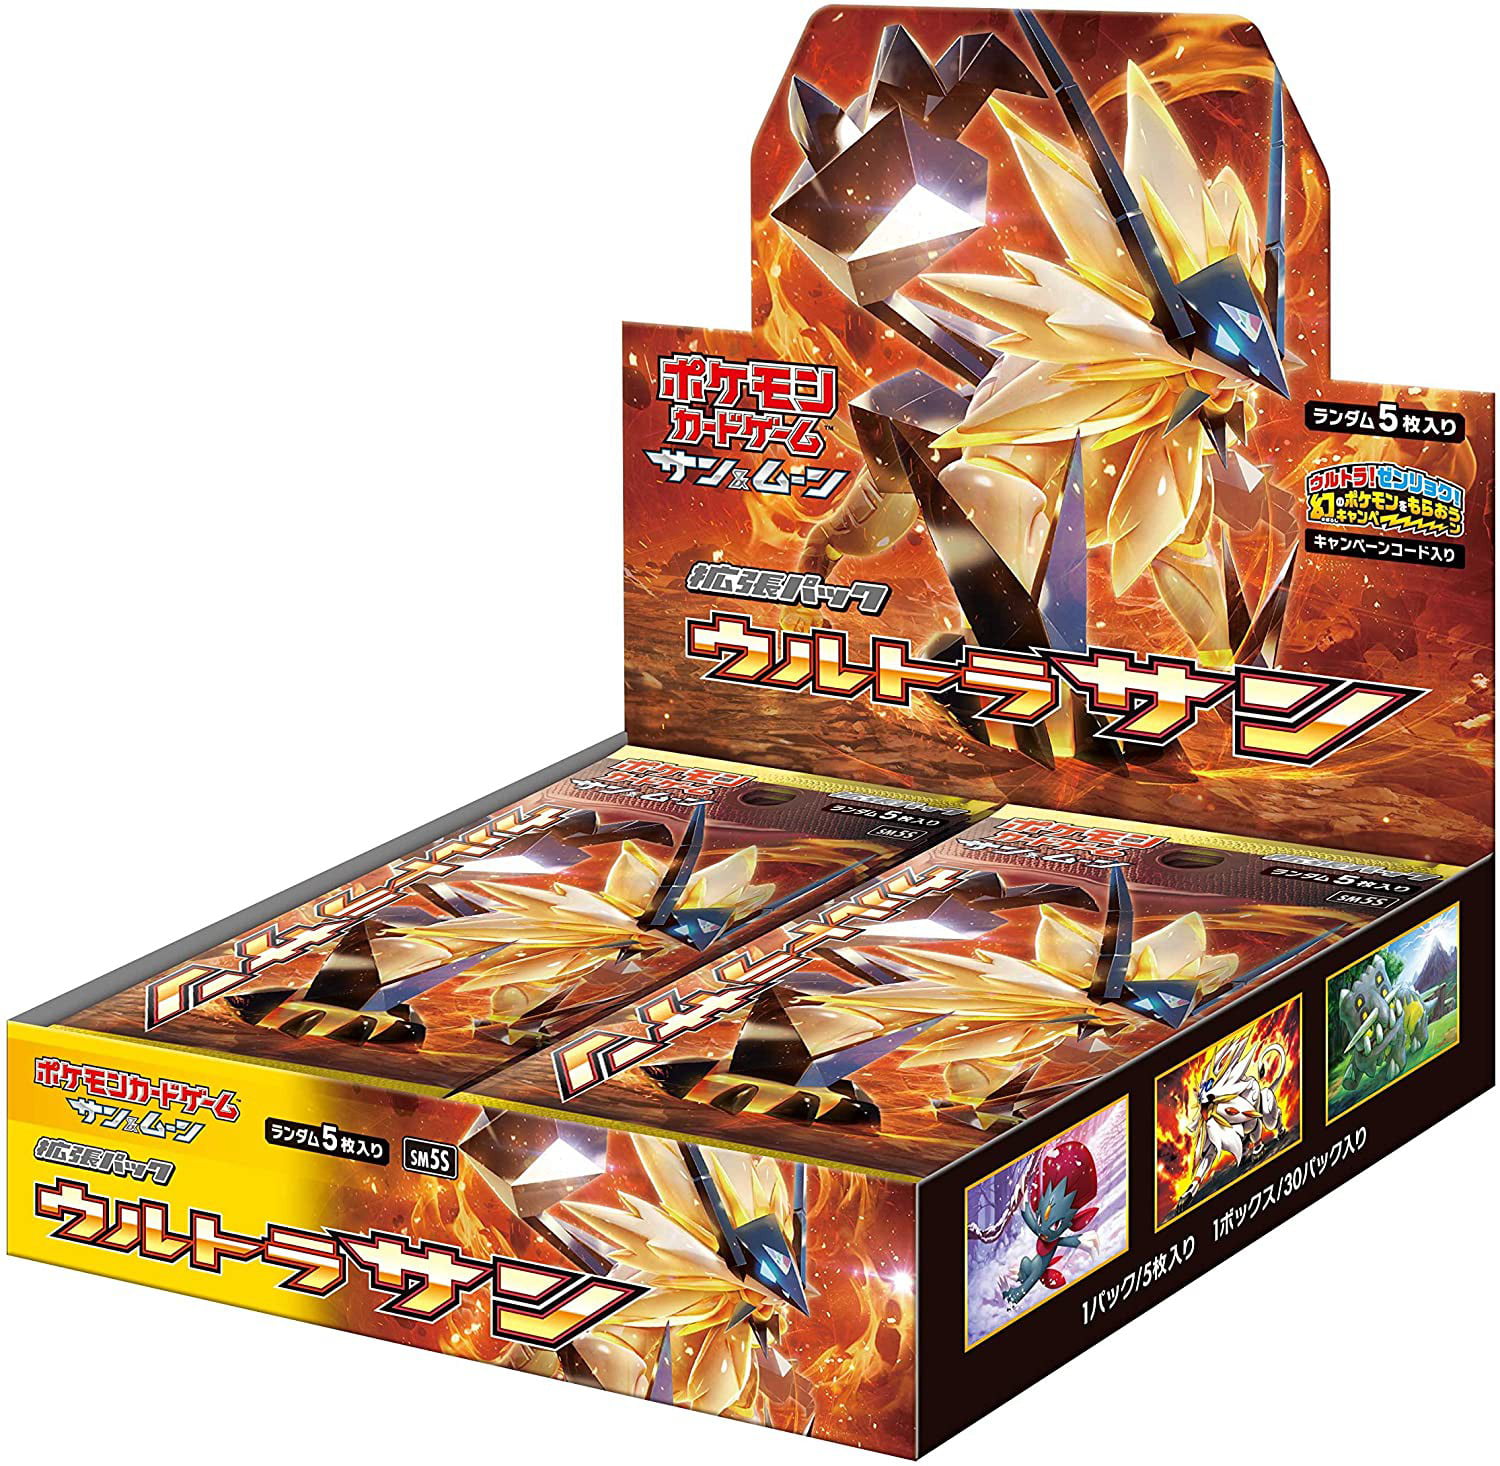 Details about   Pokemon Card Game Sun & Moon Ultra Moon Booster box 